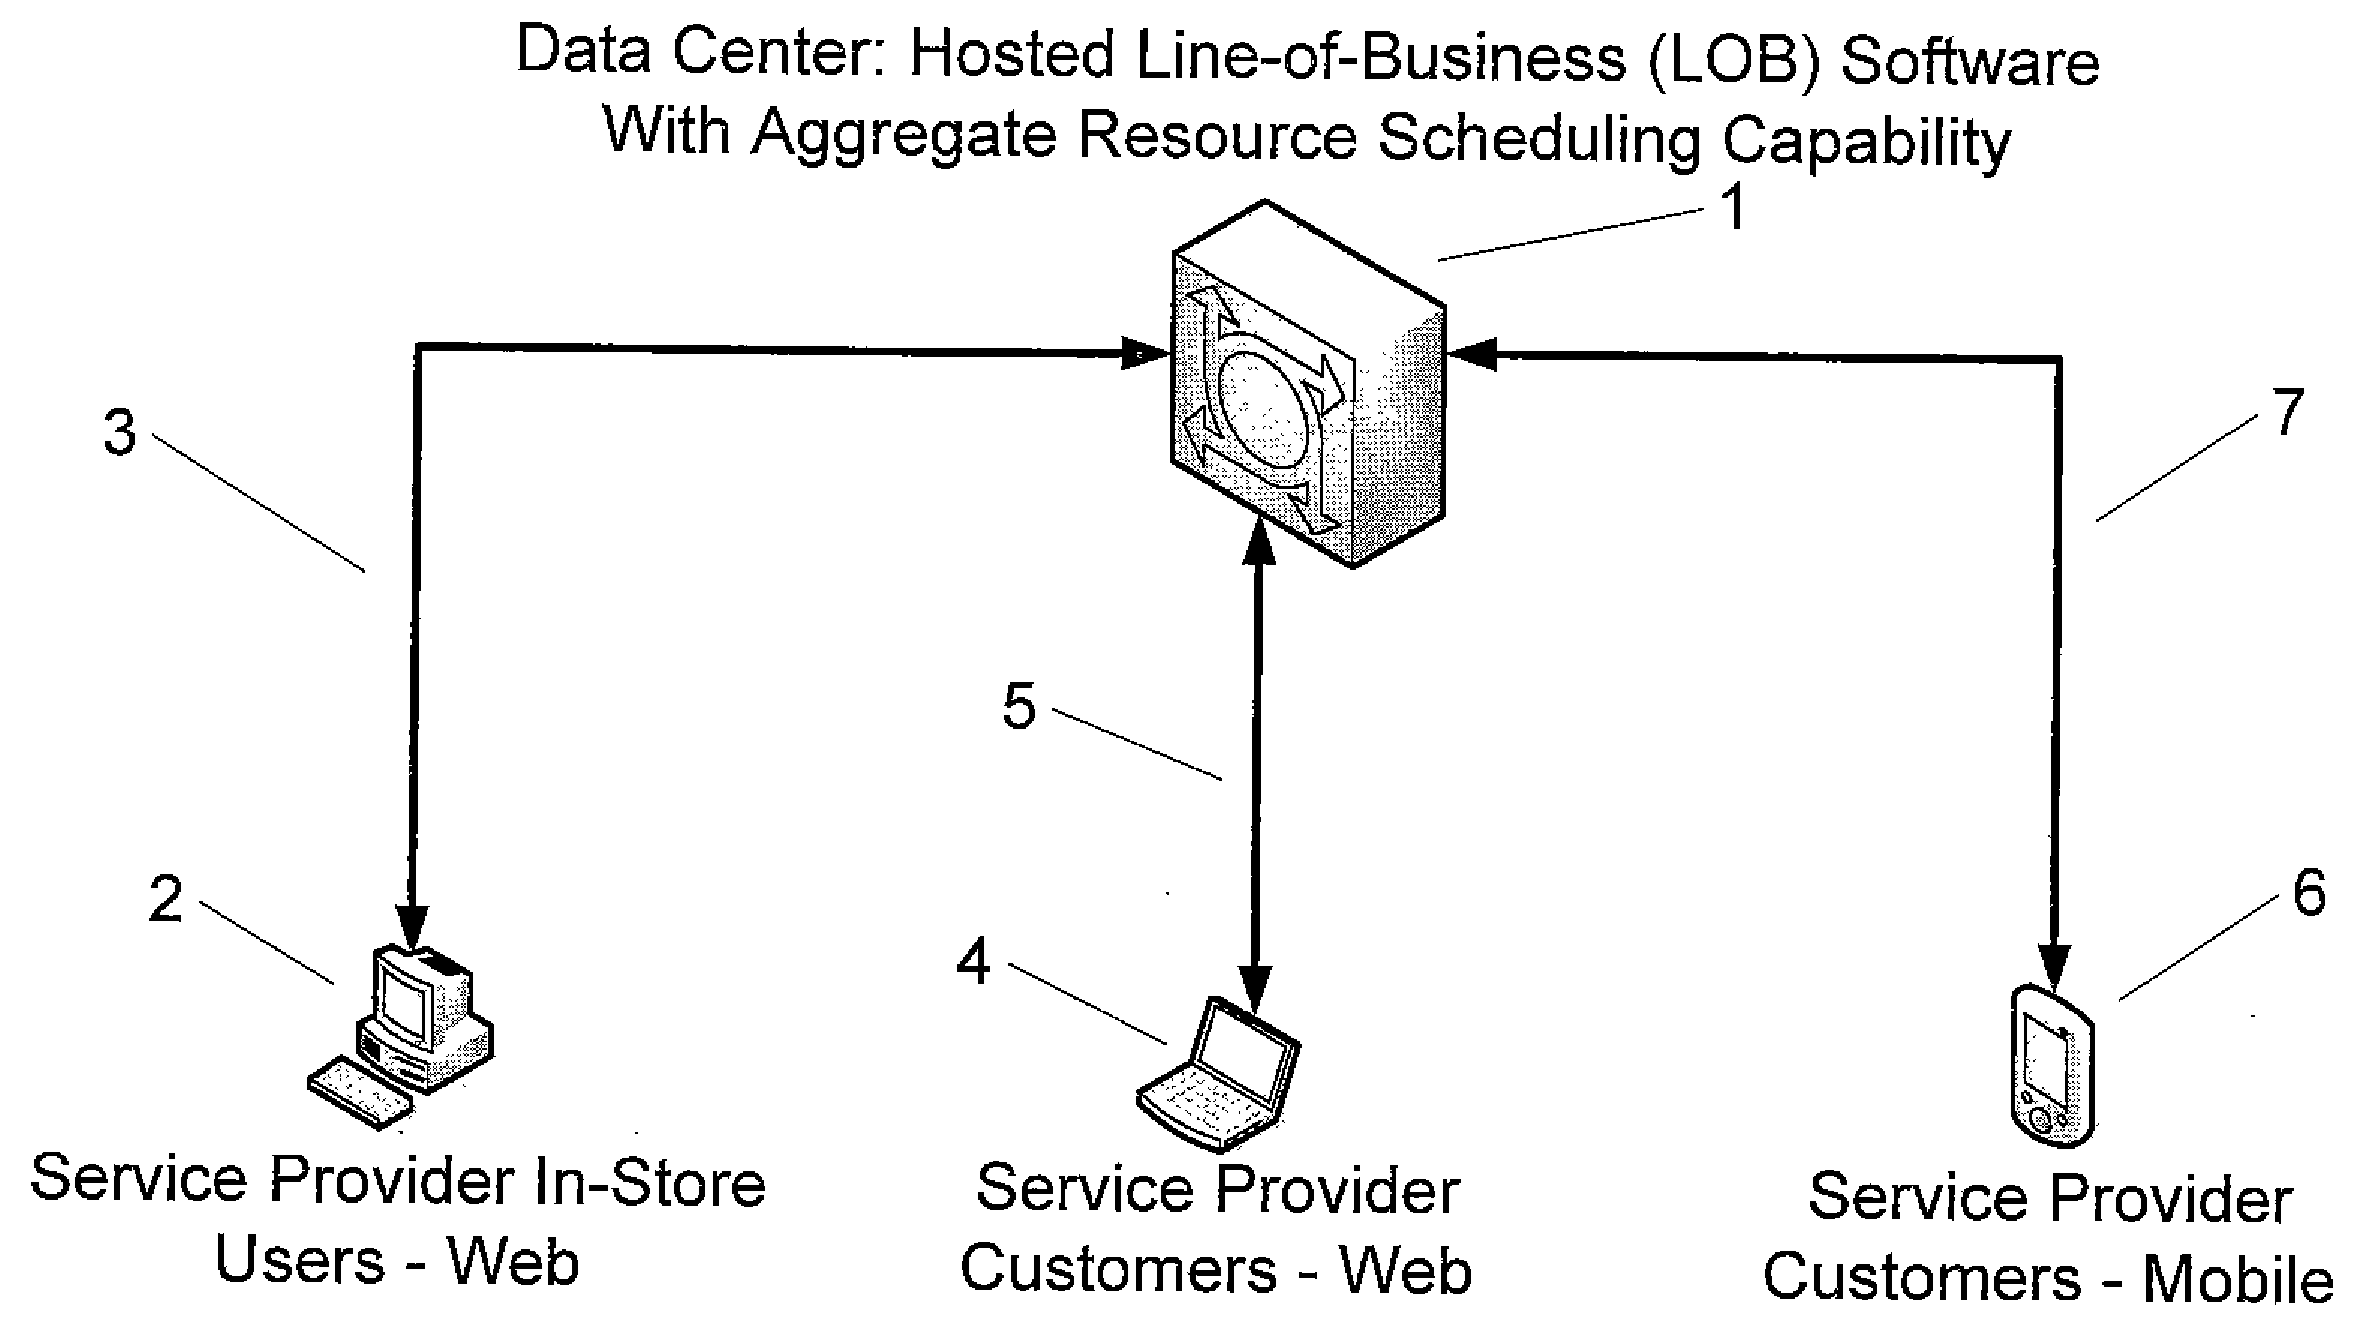 System and method for real-time scheduling of human and non-human resources